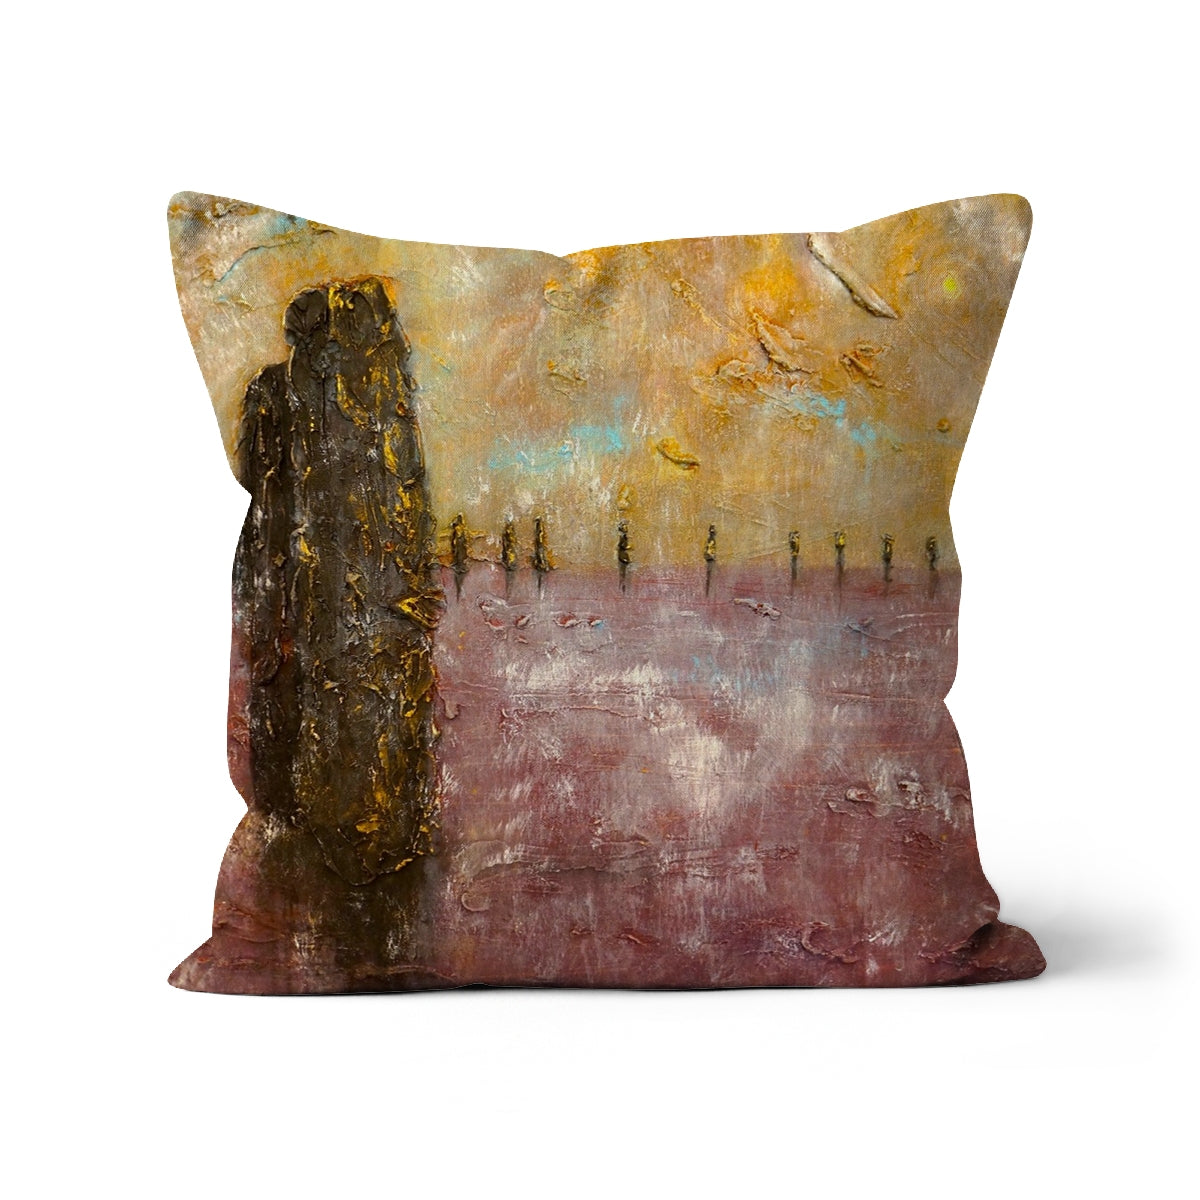 Brodgar Mist Orkney Art Gifts Cushion-Cushions-Orkney Art Gallery-Linen-12"x12"-Paintings, Prints, Homeware, Art Gifts From Scotland By Scottish Artist Kevin Hunter